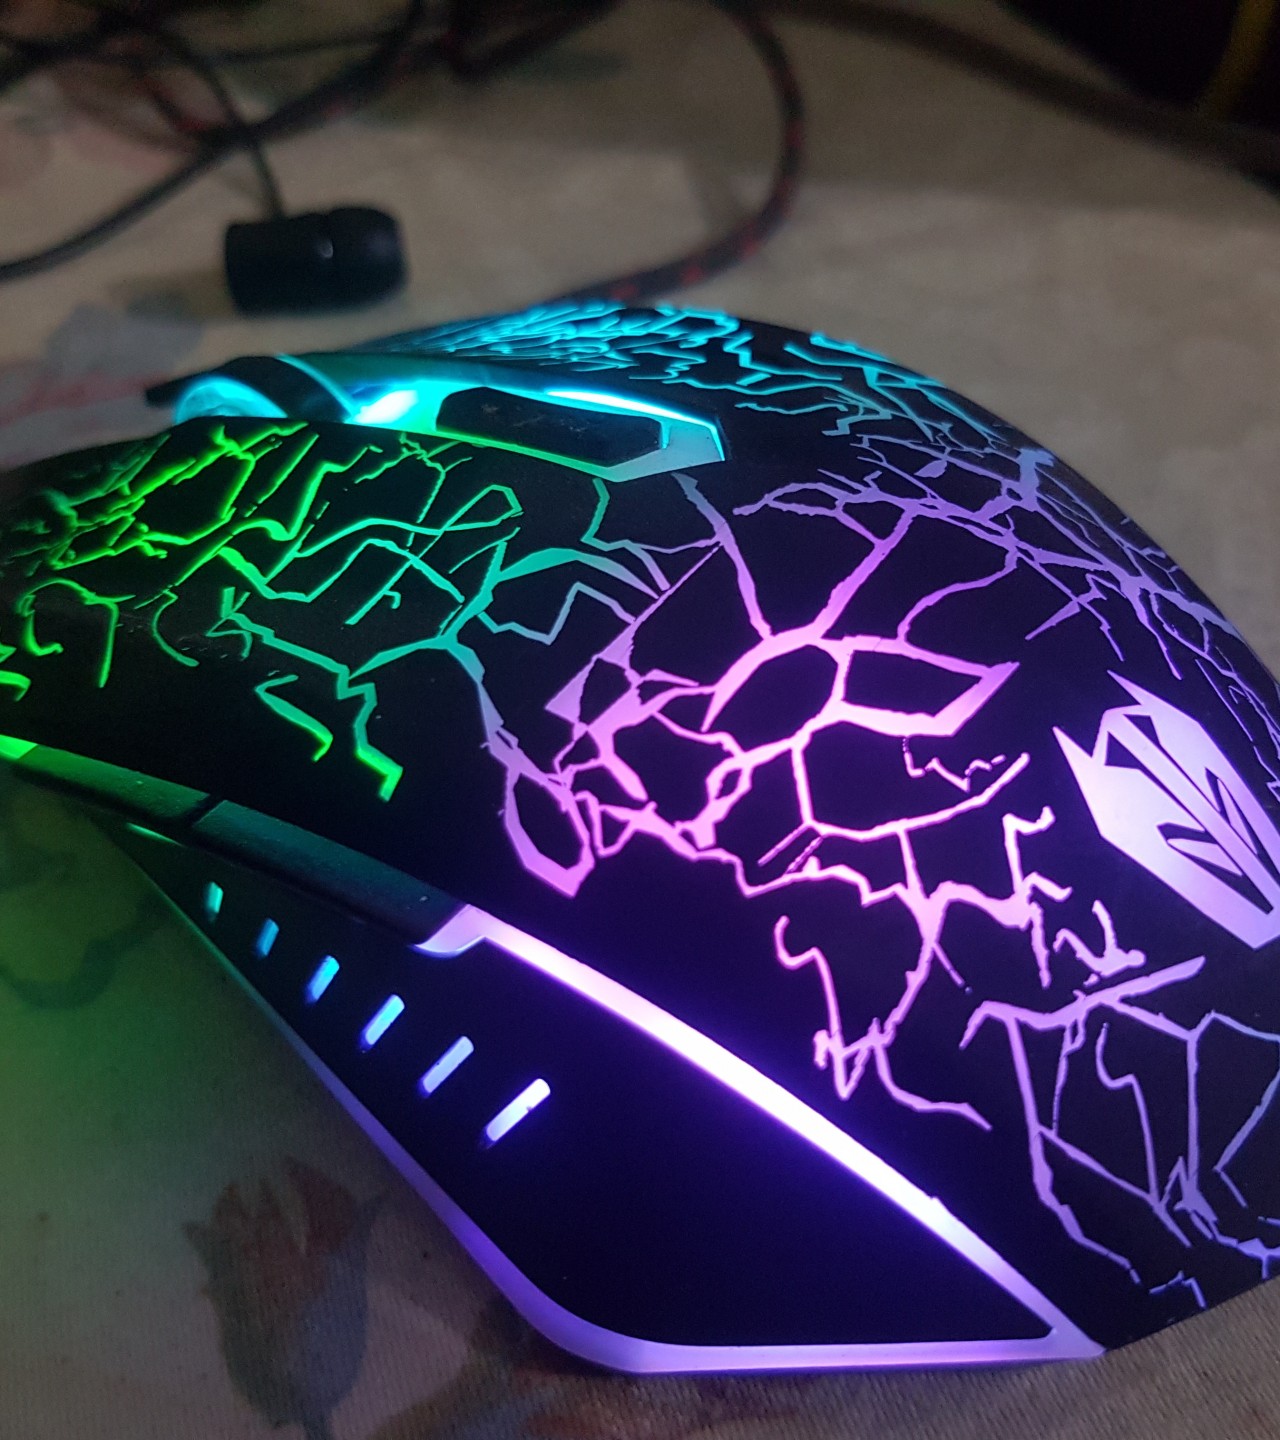 Professional Gaming Mouse with changing lights